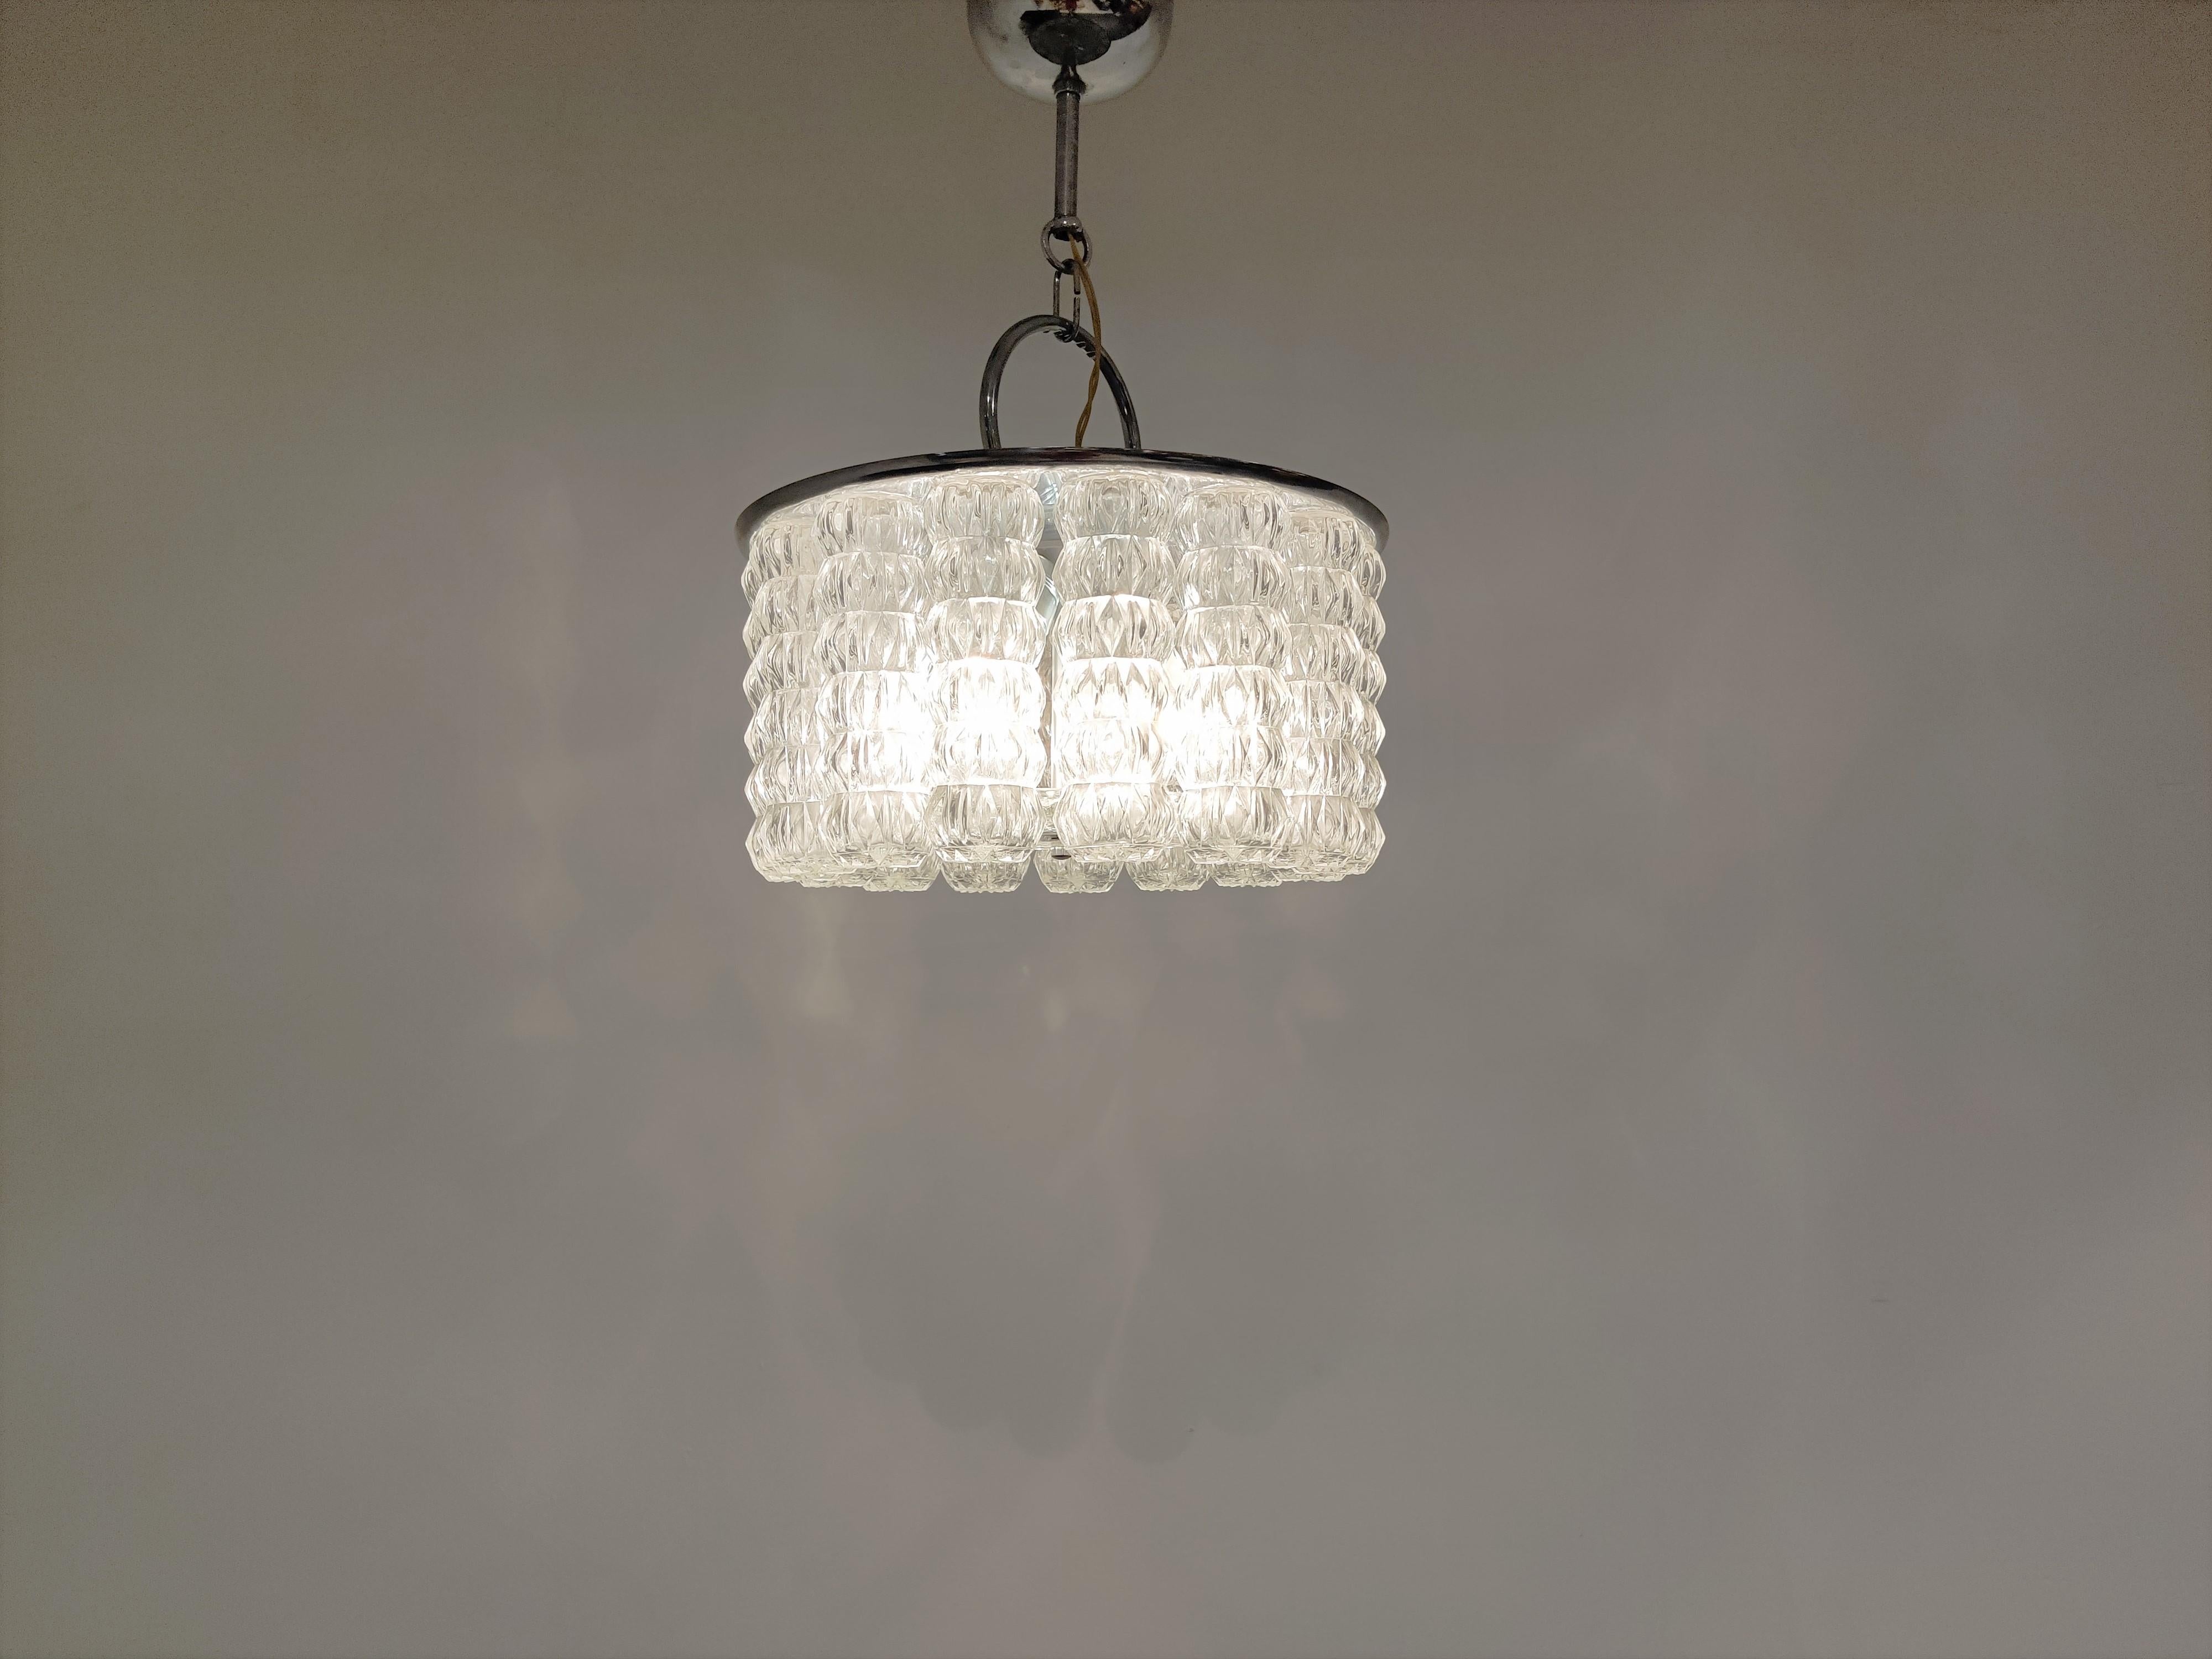 Mid century chandelier with linked glass lamp shades and chrome.

The lamp emits a beautiful light.

Good condition

Works with E14 light bulbs.

1960s - Belgium

Measures: Height: 56cm/22.04